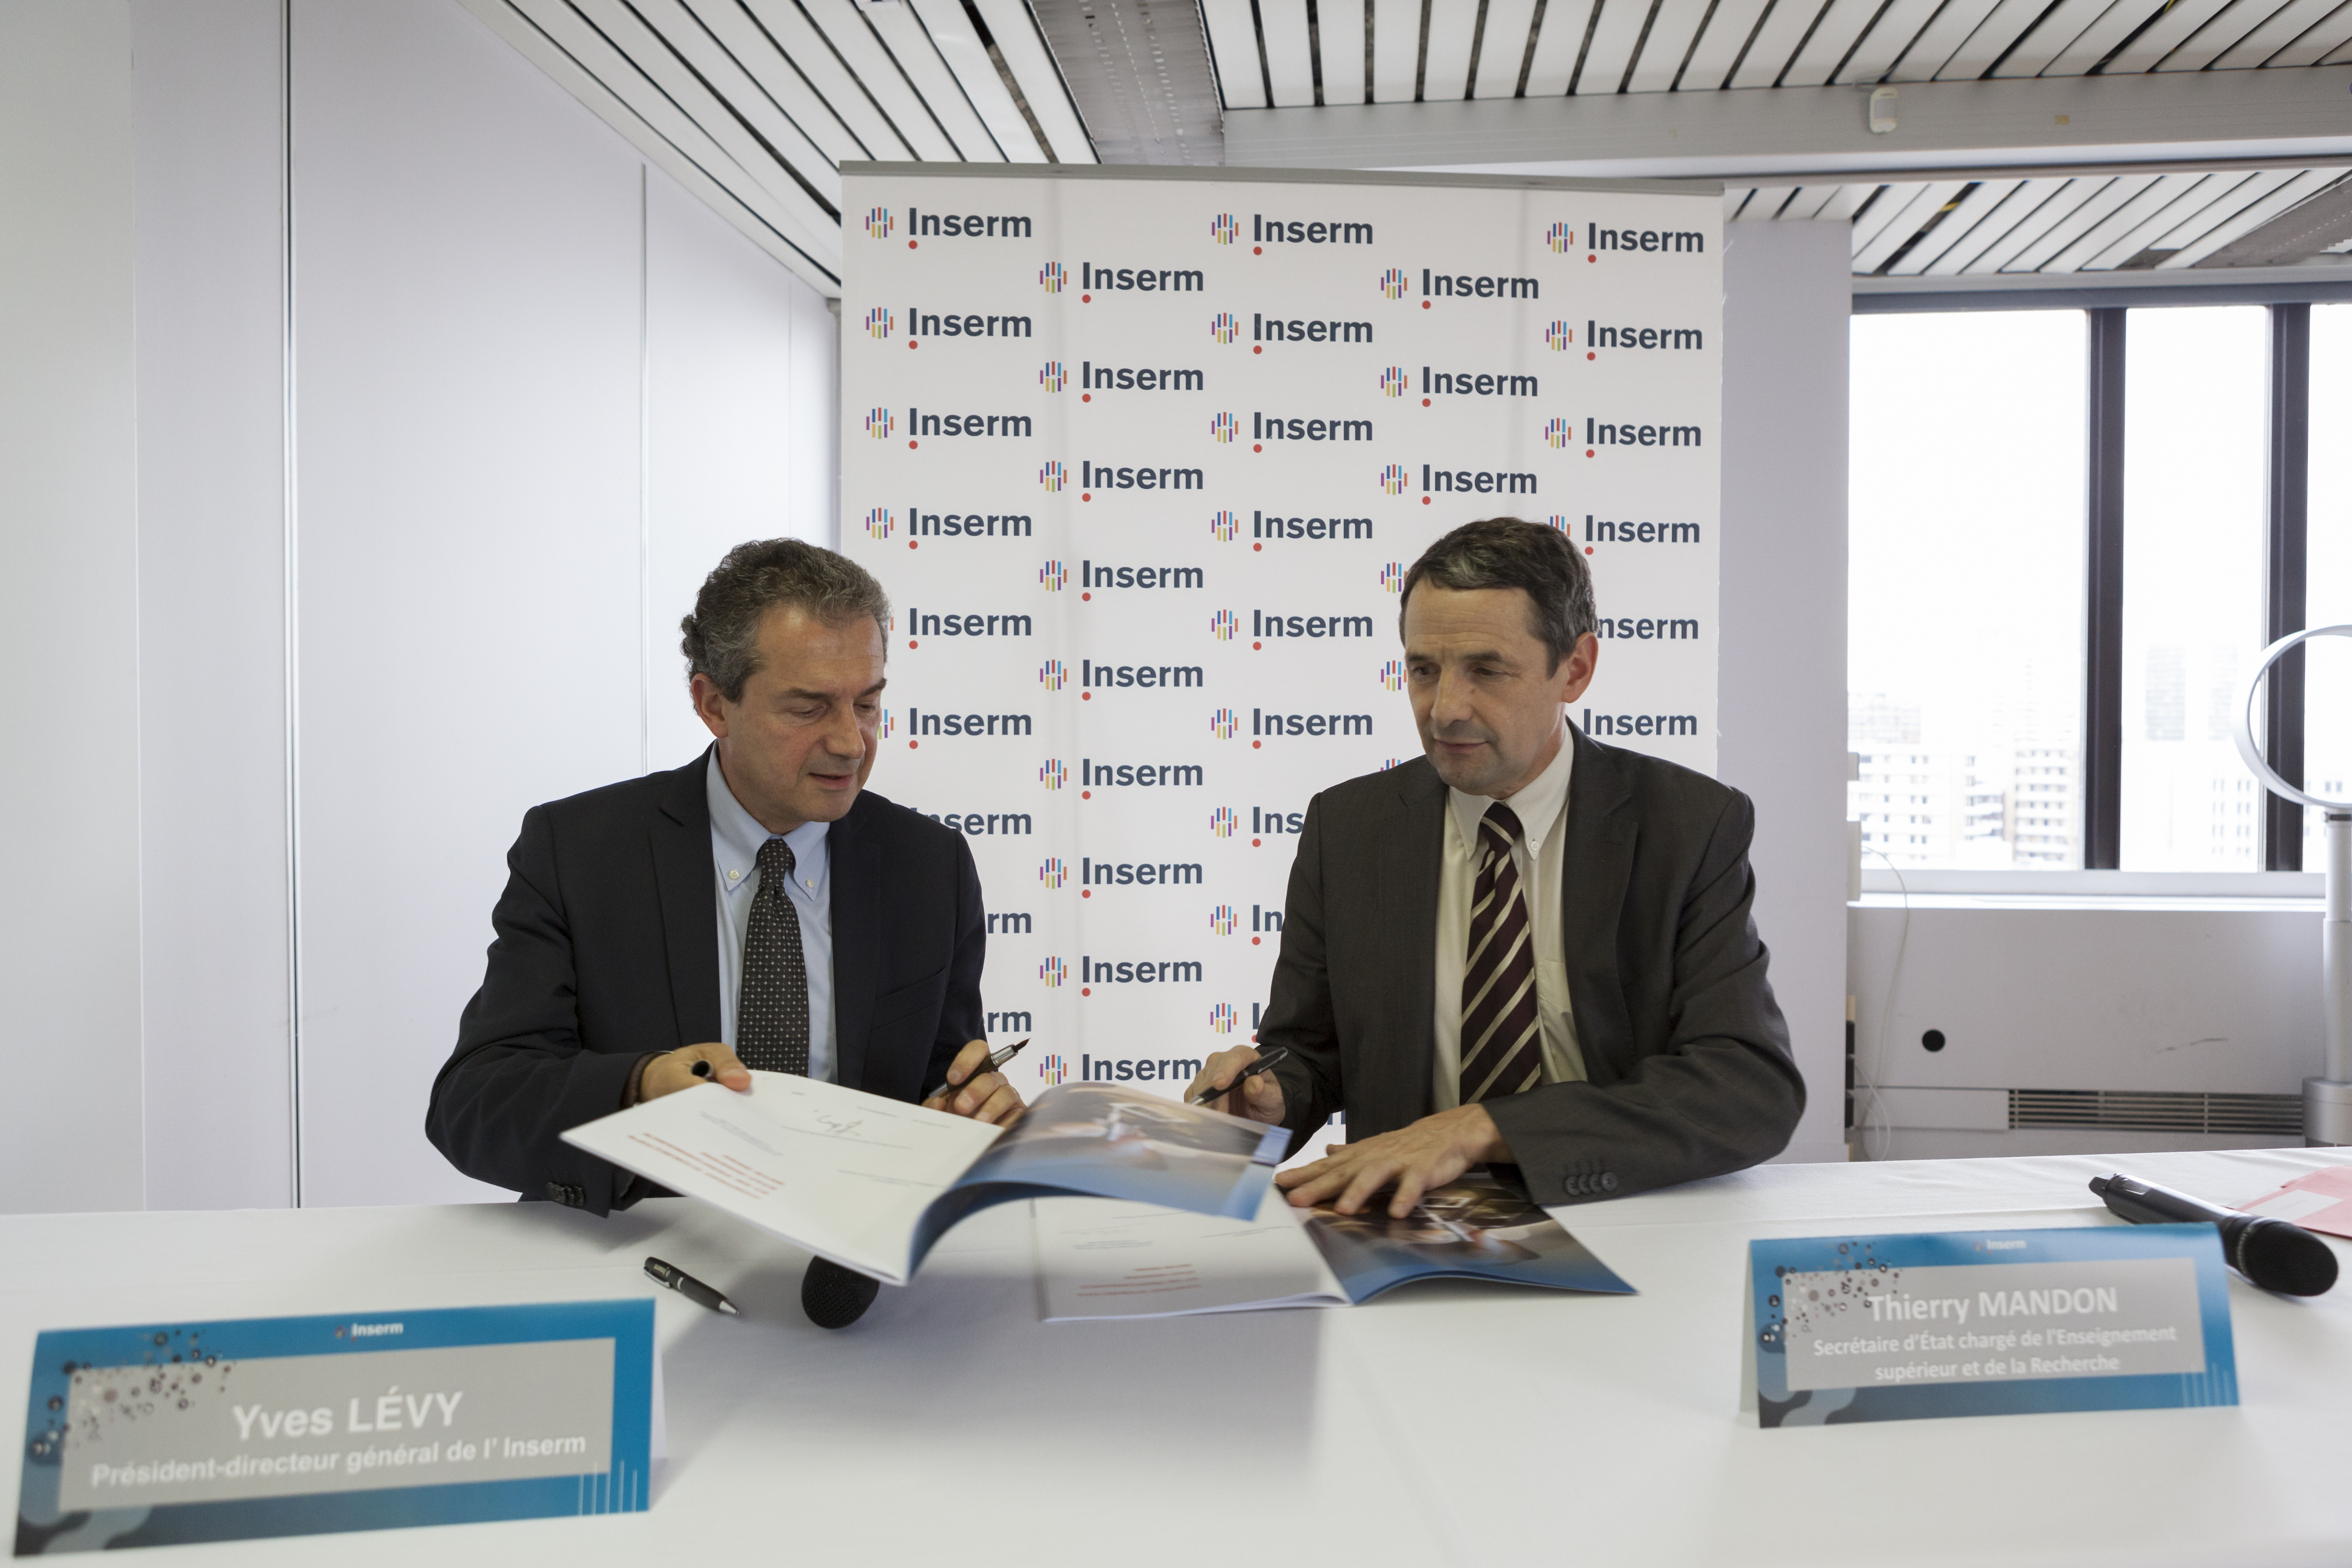 Objectives and performance contract signed between the State and Inserm for 2016–2020